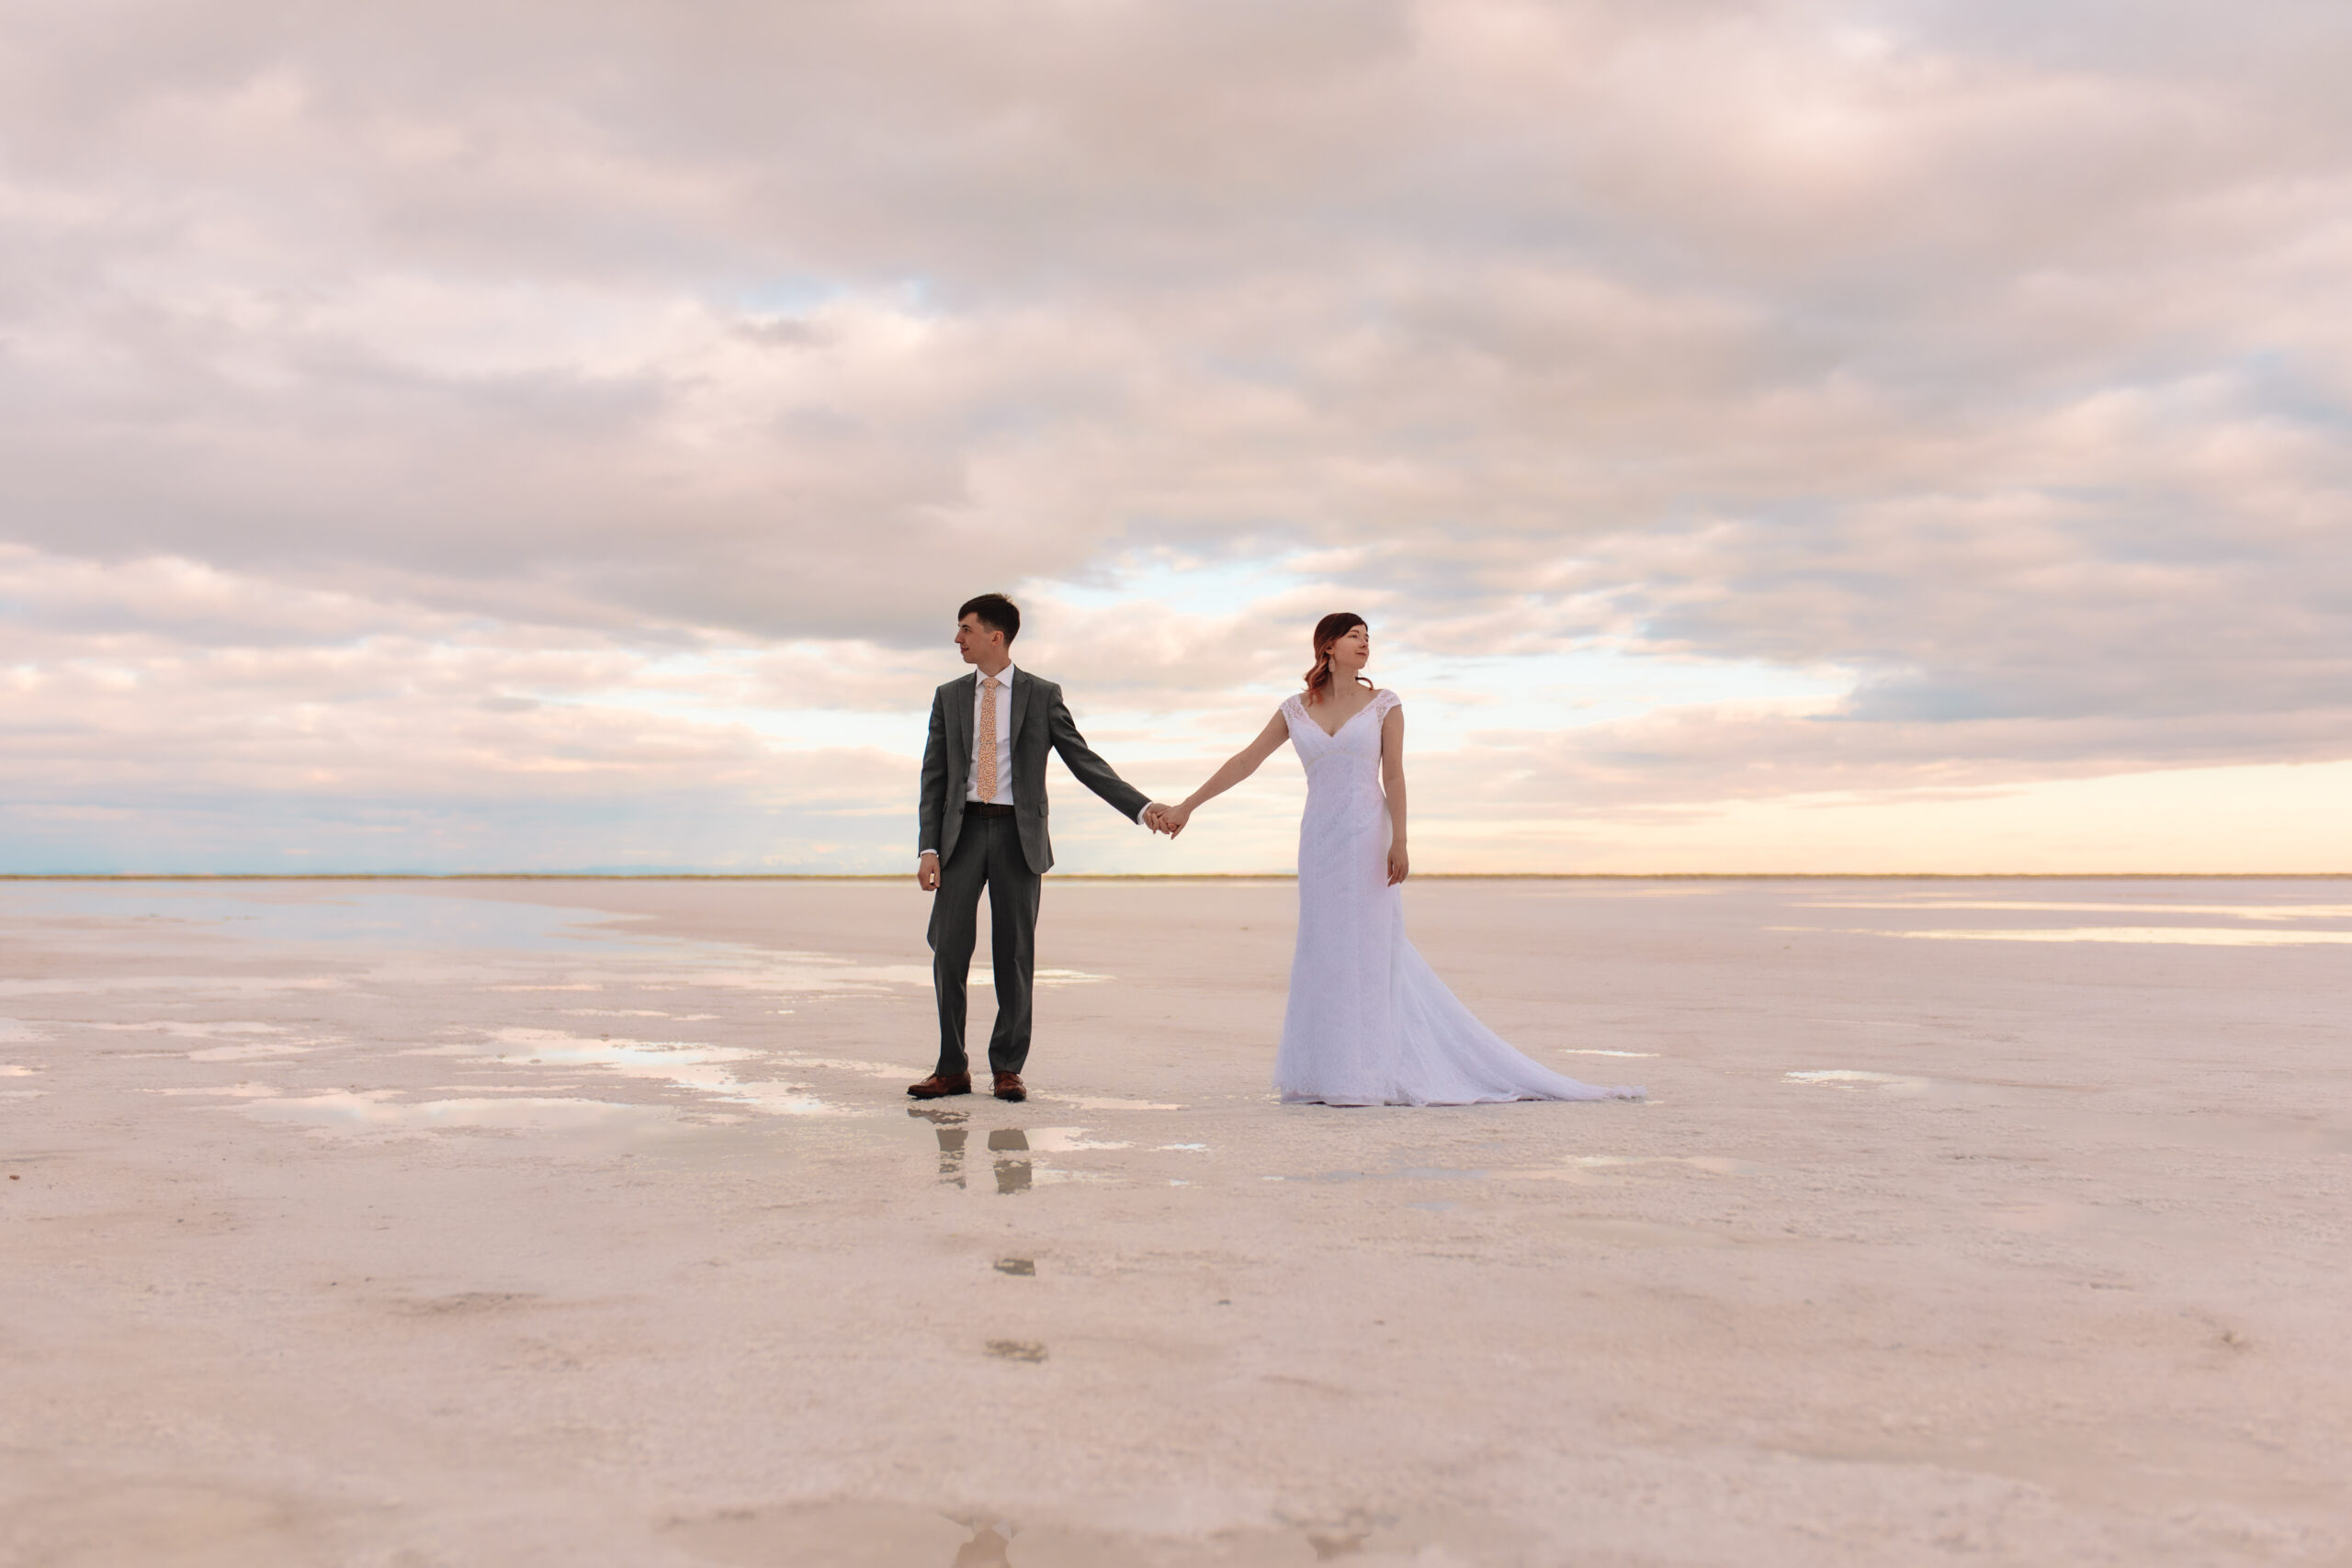 Elopement couple standing next to each other holding hands, looking in opposite directions on the flooded salt flats in Utah. The candy floss skies are reflecting in the water below them